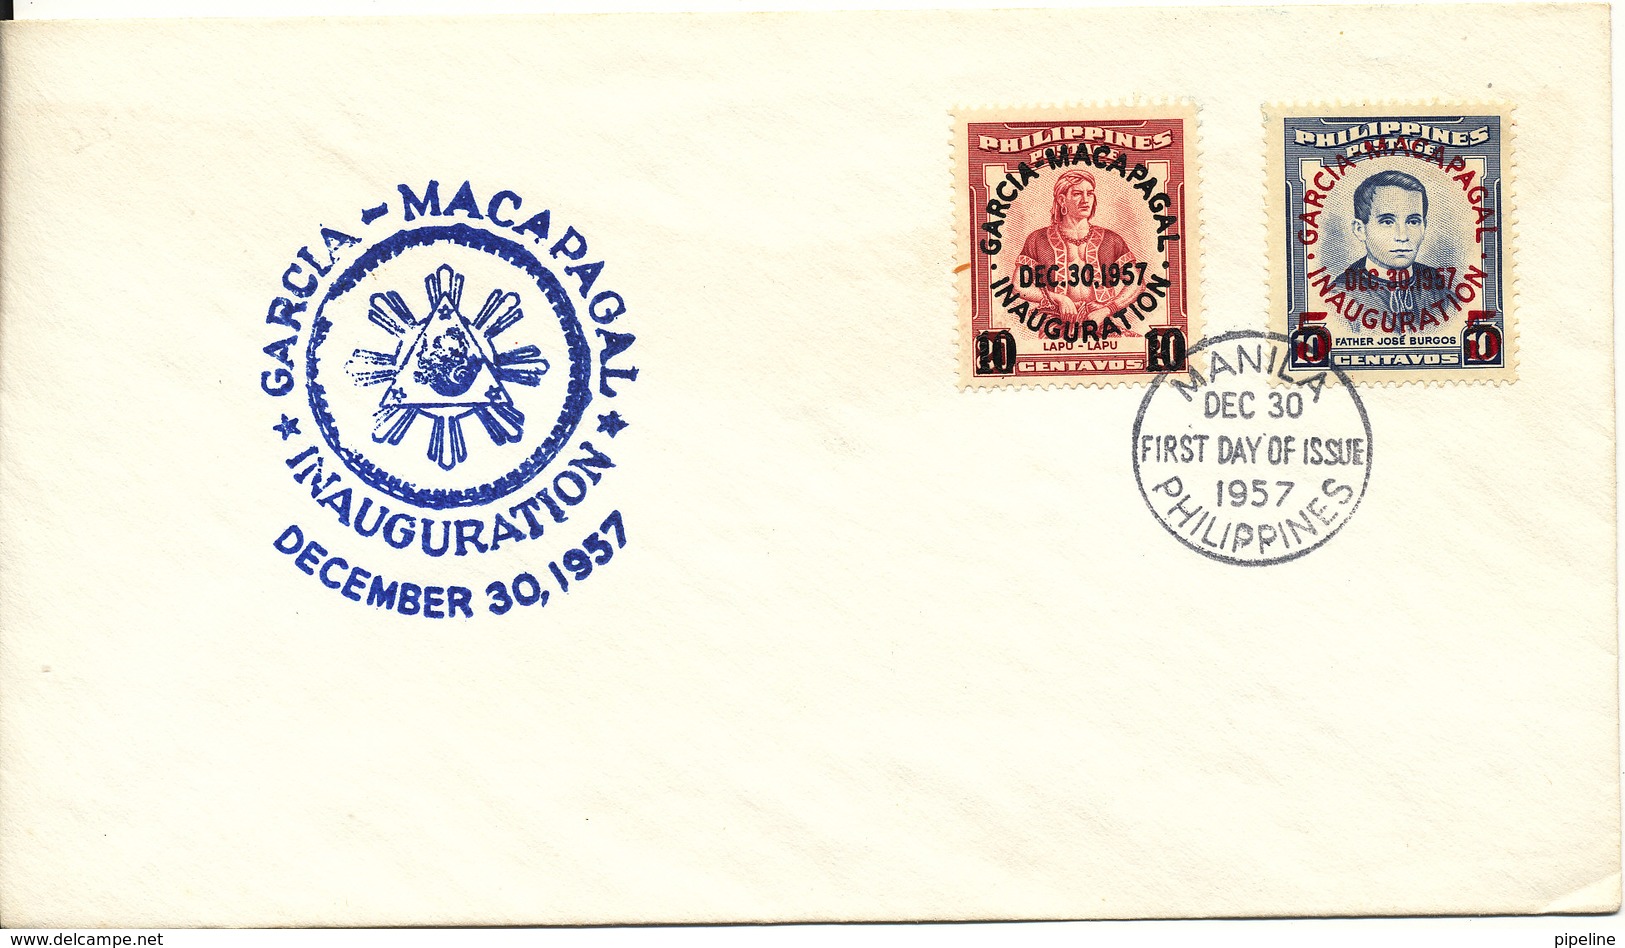 Philippines FDC 30-12-1957 Garcia Macapagal Inauguration Overprinted Stamps - Philippines